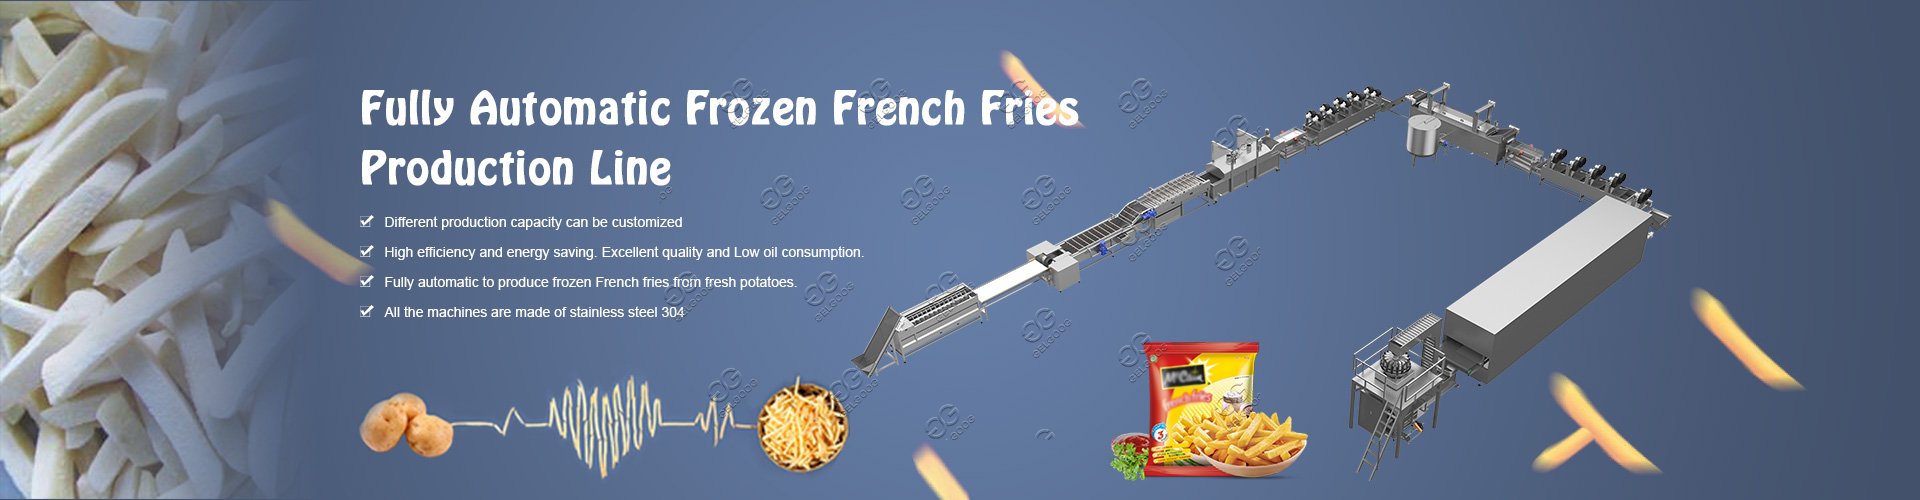 Fully Automatic 1 ton/h Frozen French Fries Production Line